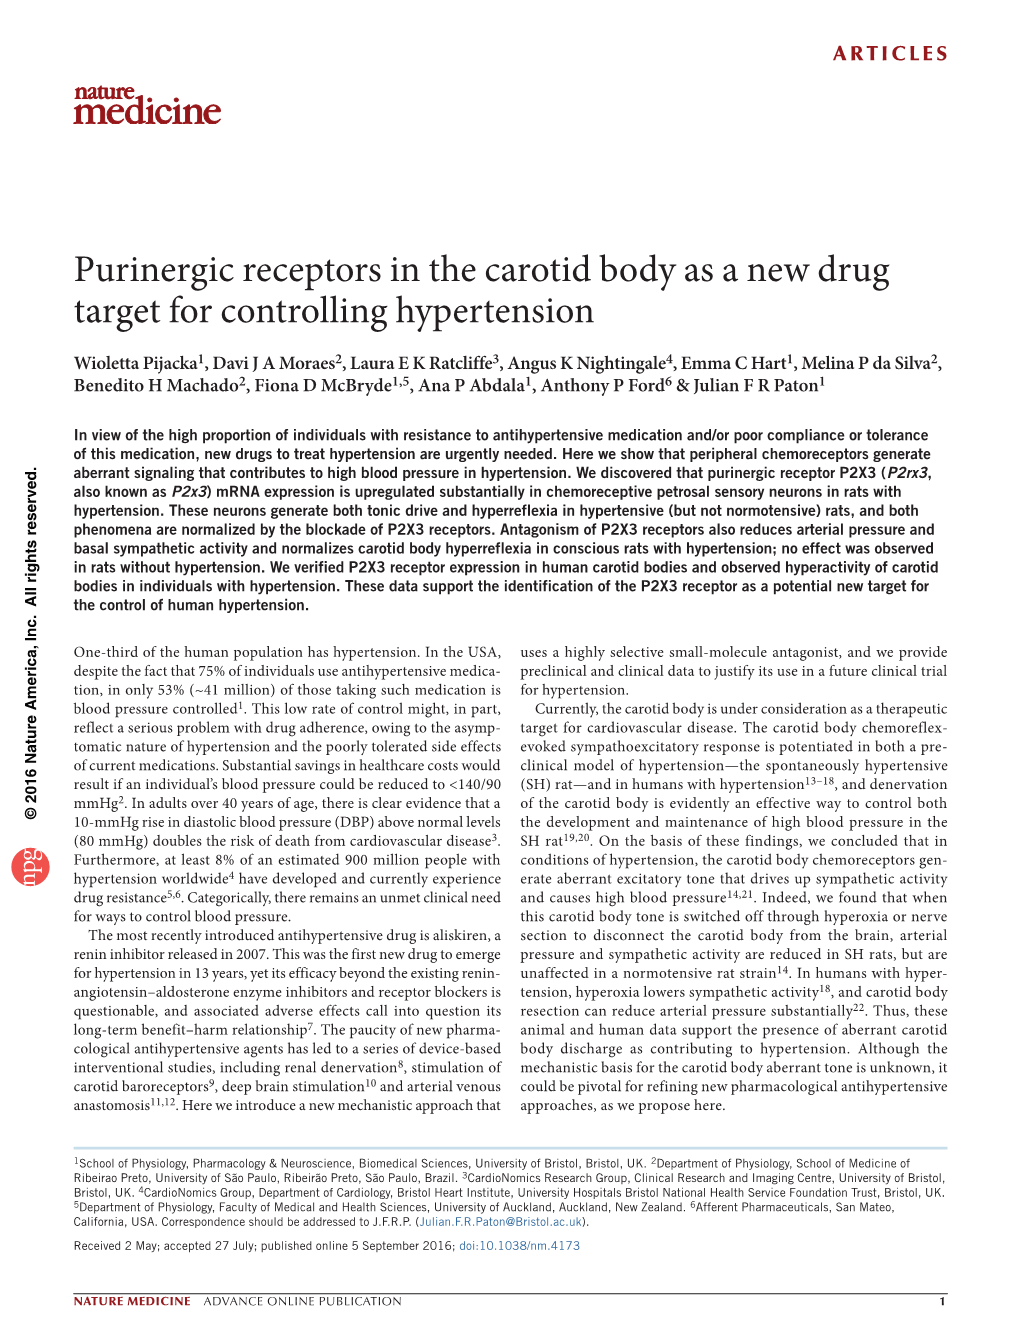 Purinergic Receptors in the Carotid Body As a New Drug Target For